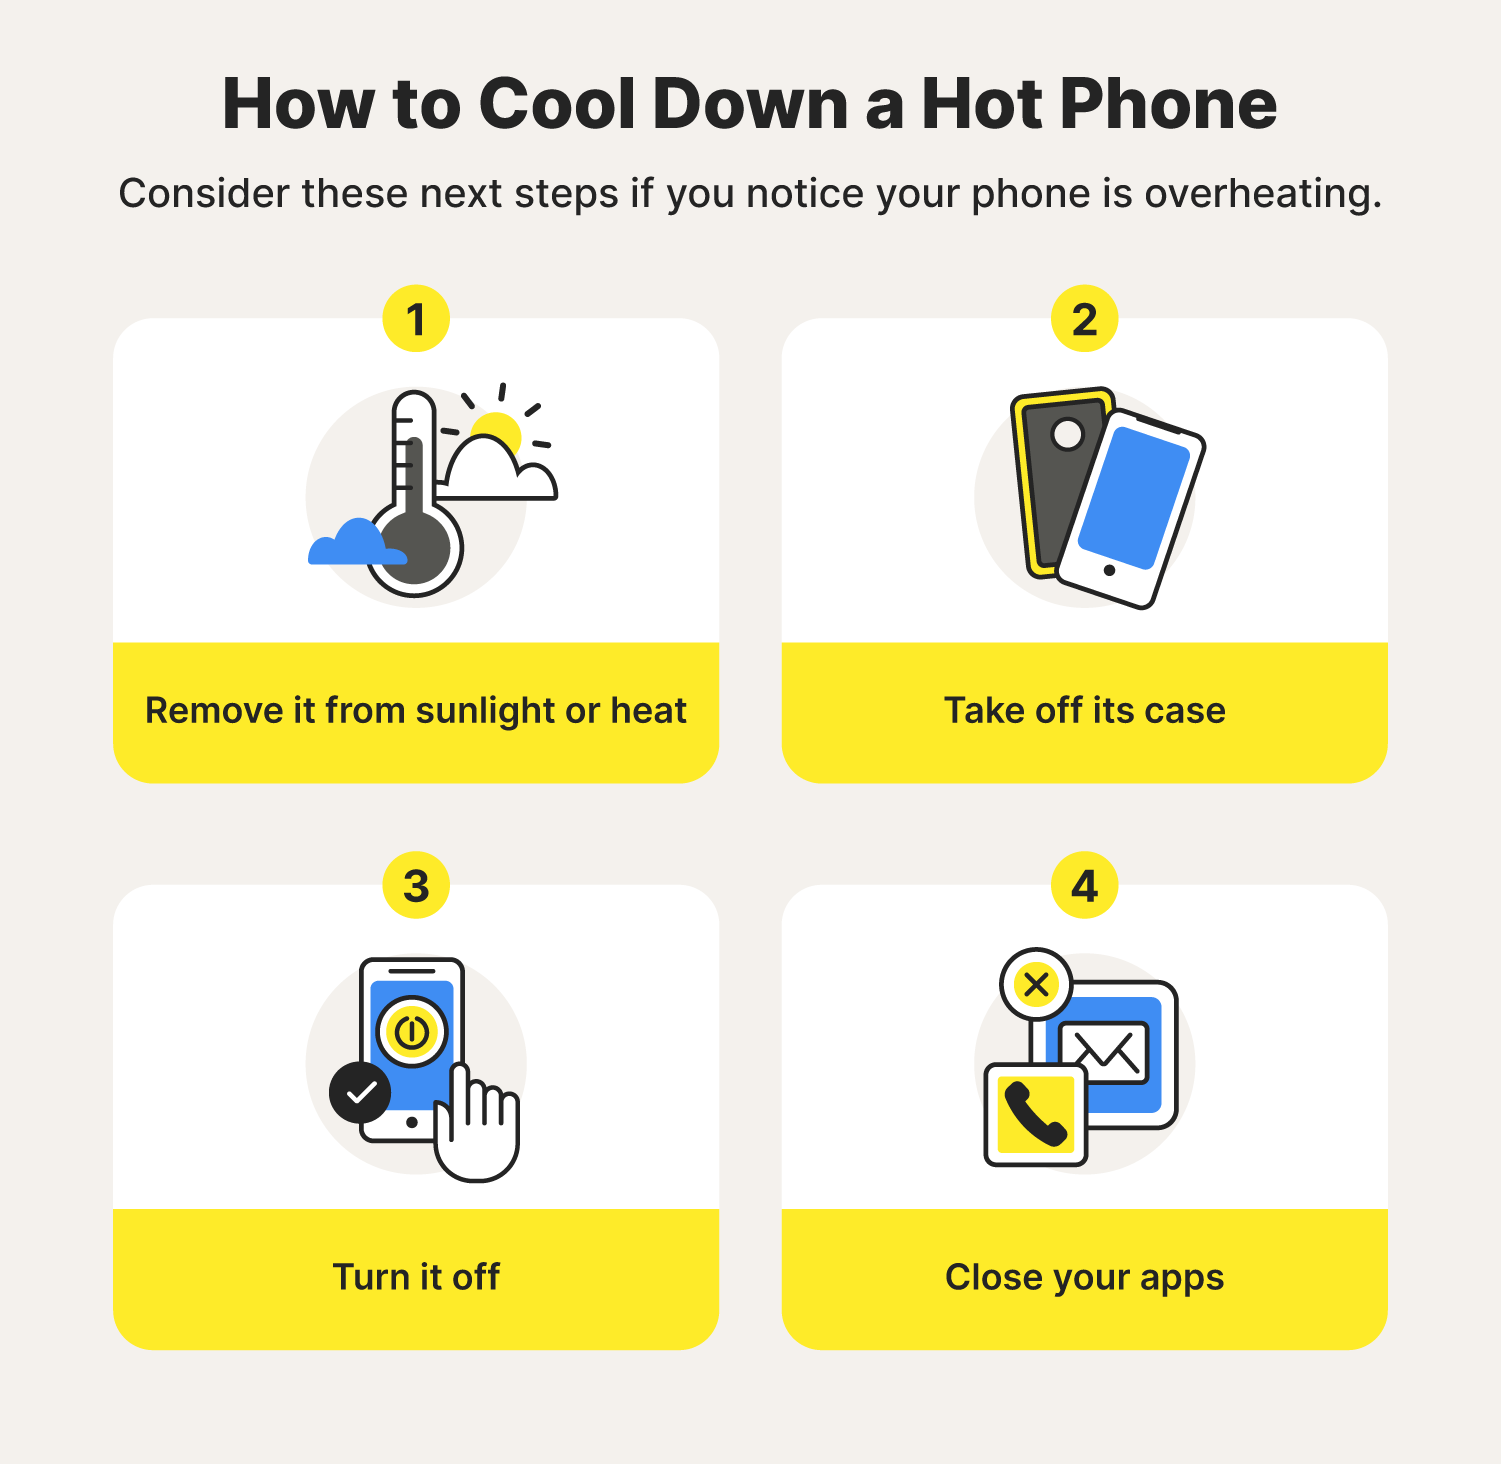 How to cool down a hot phone